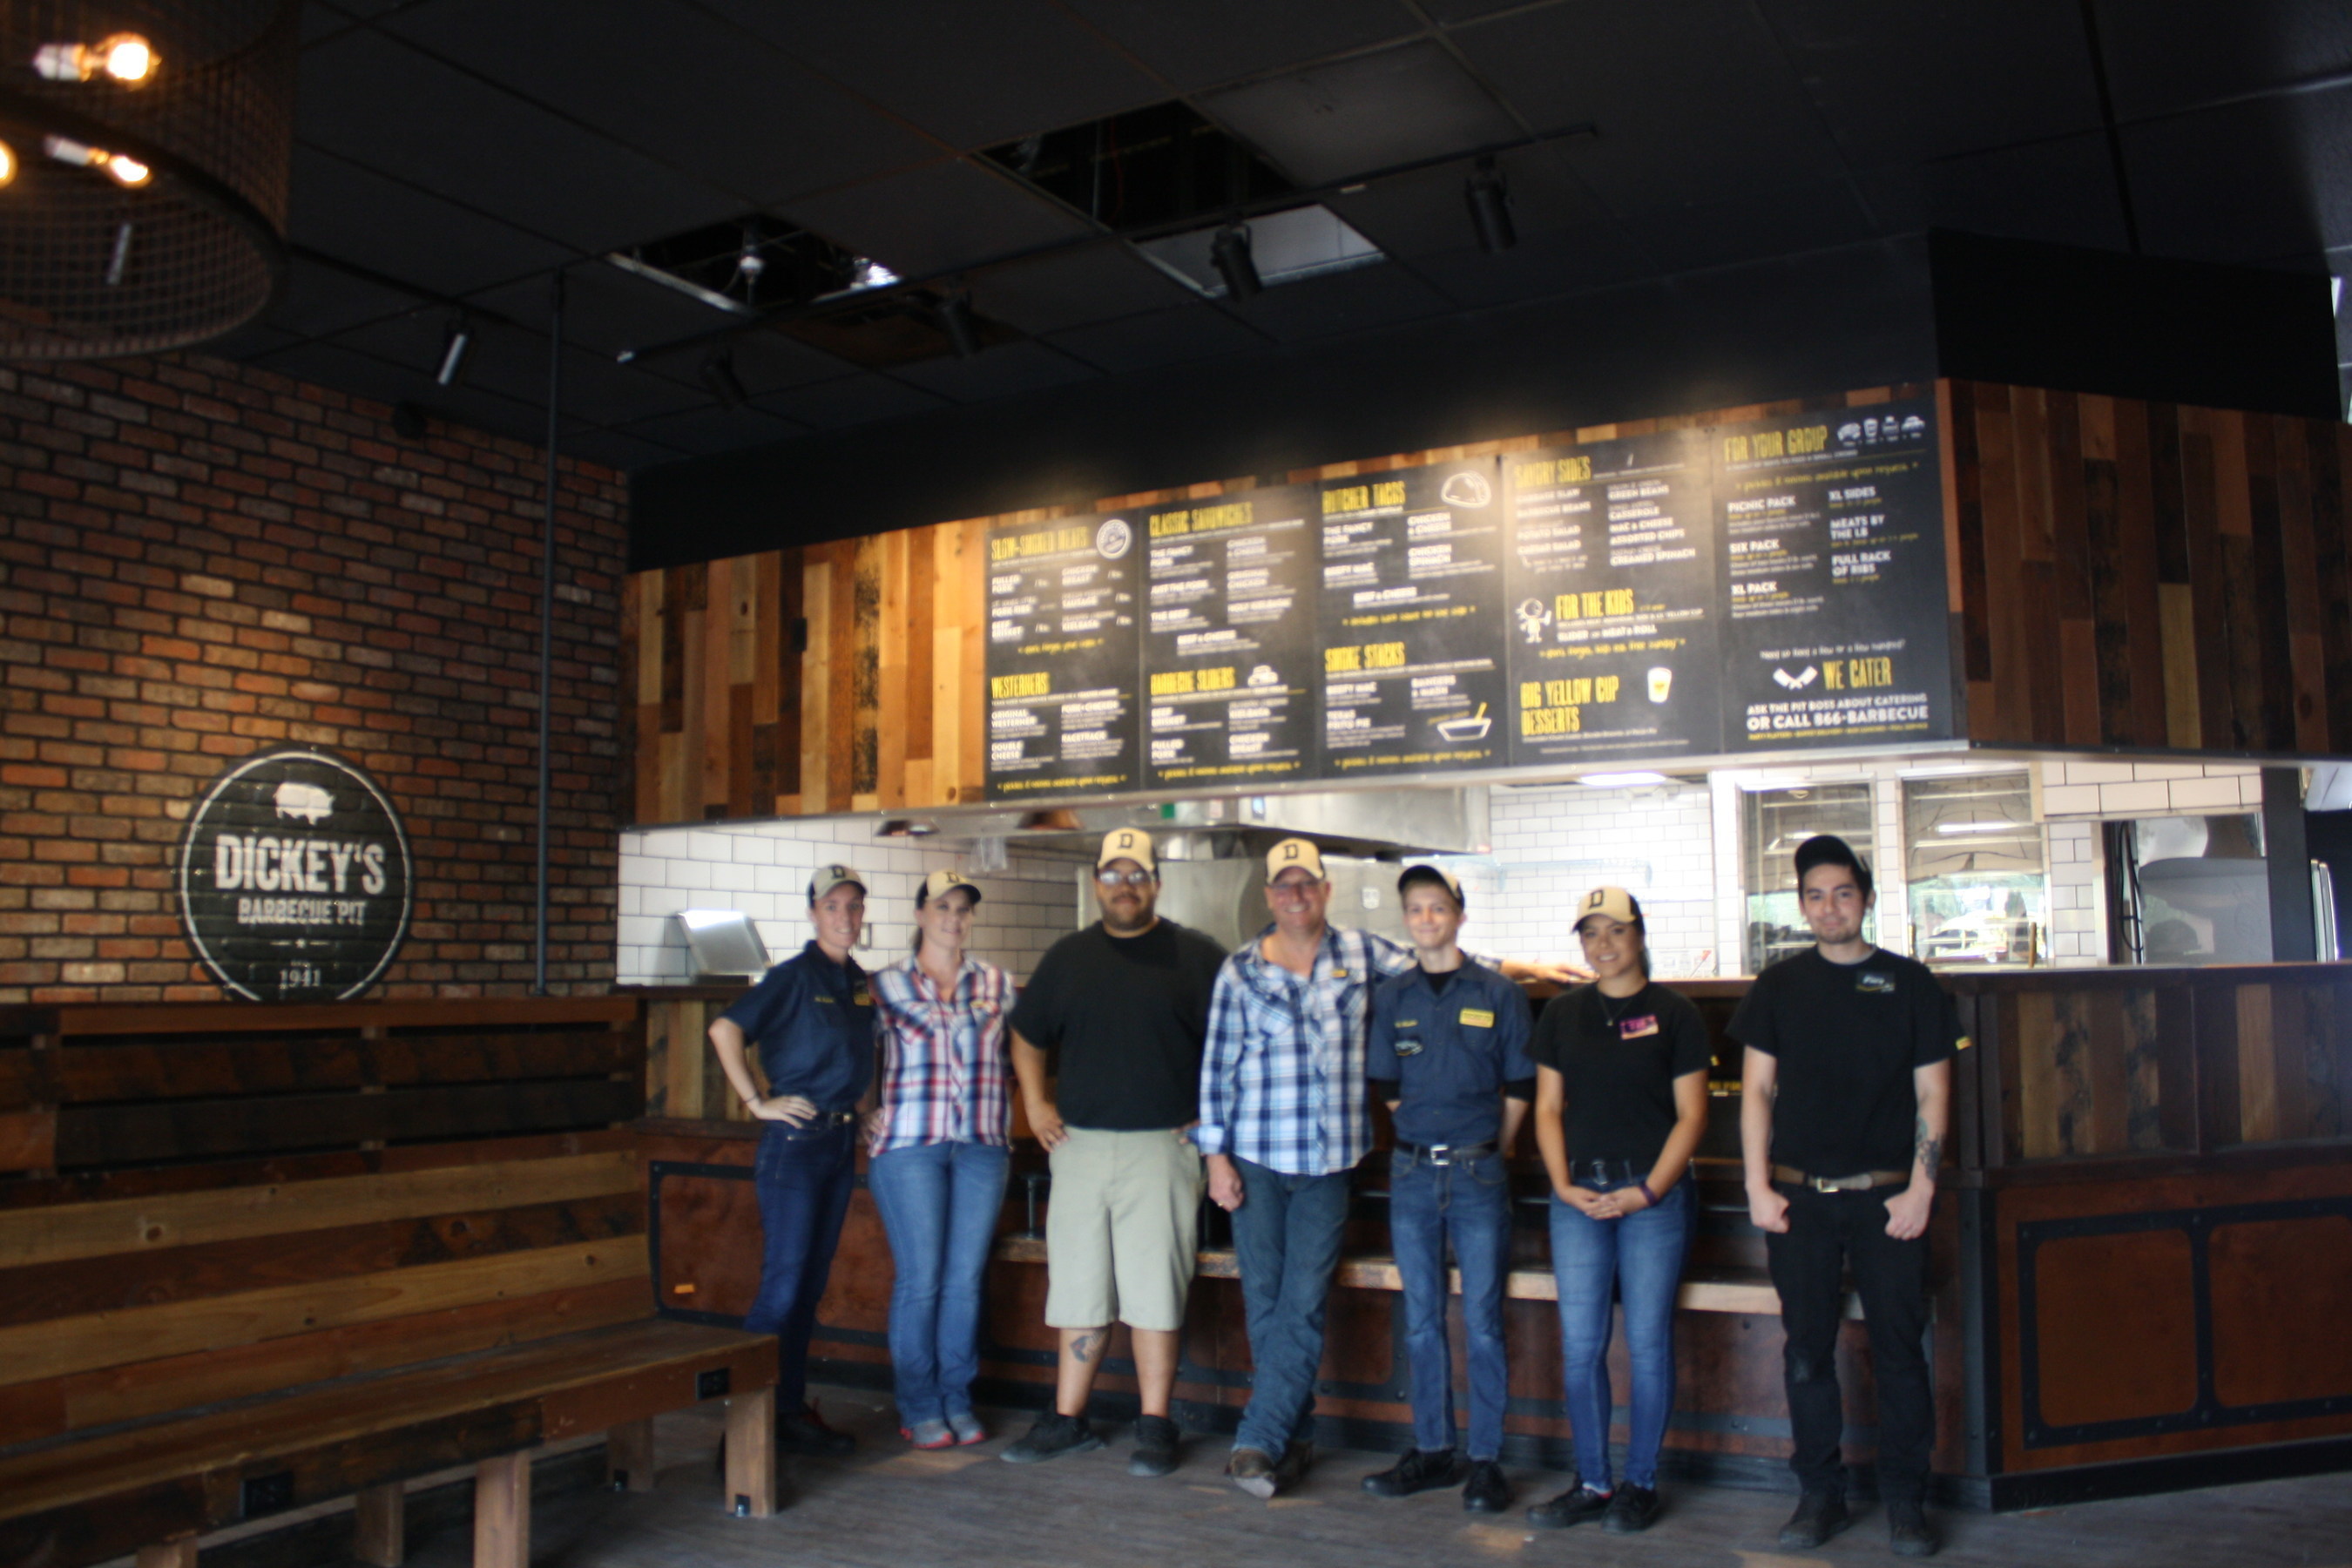 General Manager Travis Cote and Owner/Operator Maurice D'Aoust open Dickey's Barbecue Pit in Maricopa on Thursday